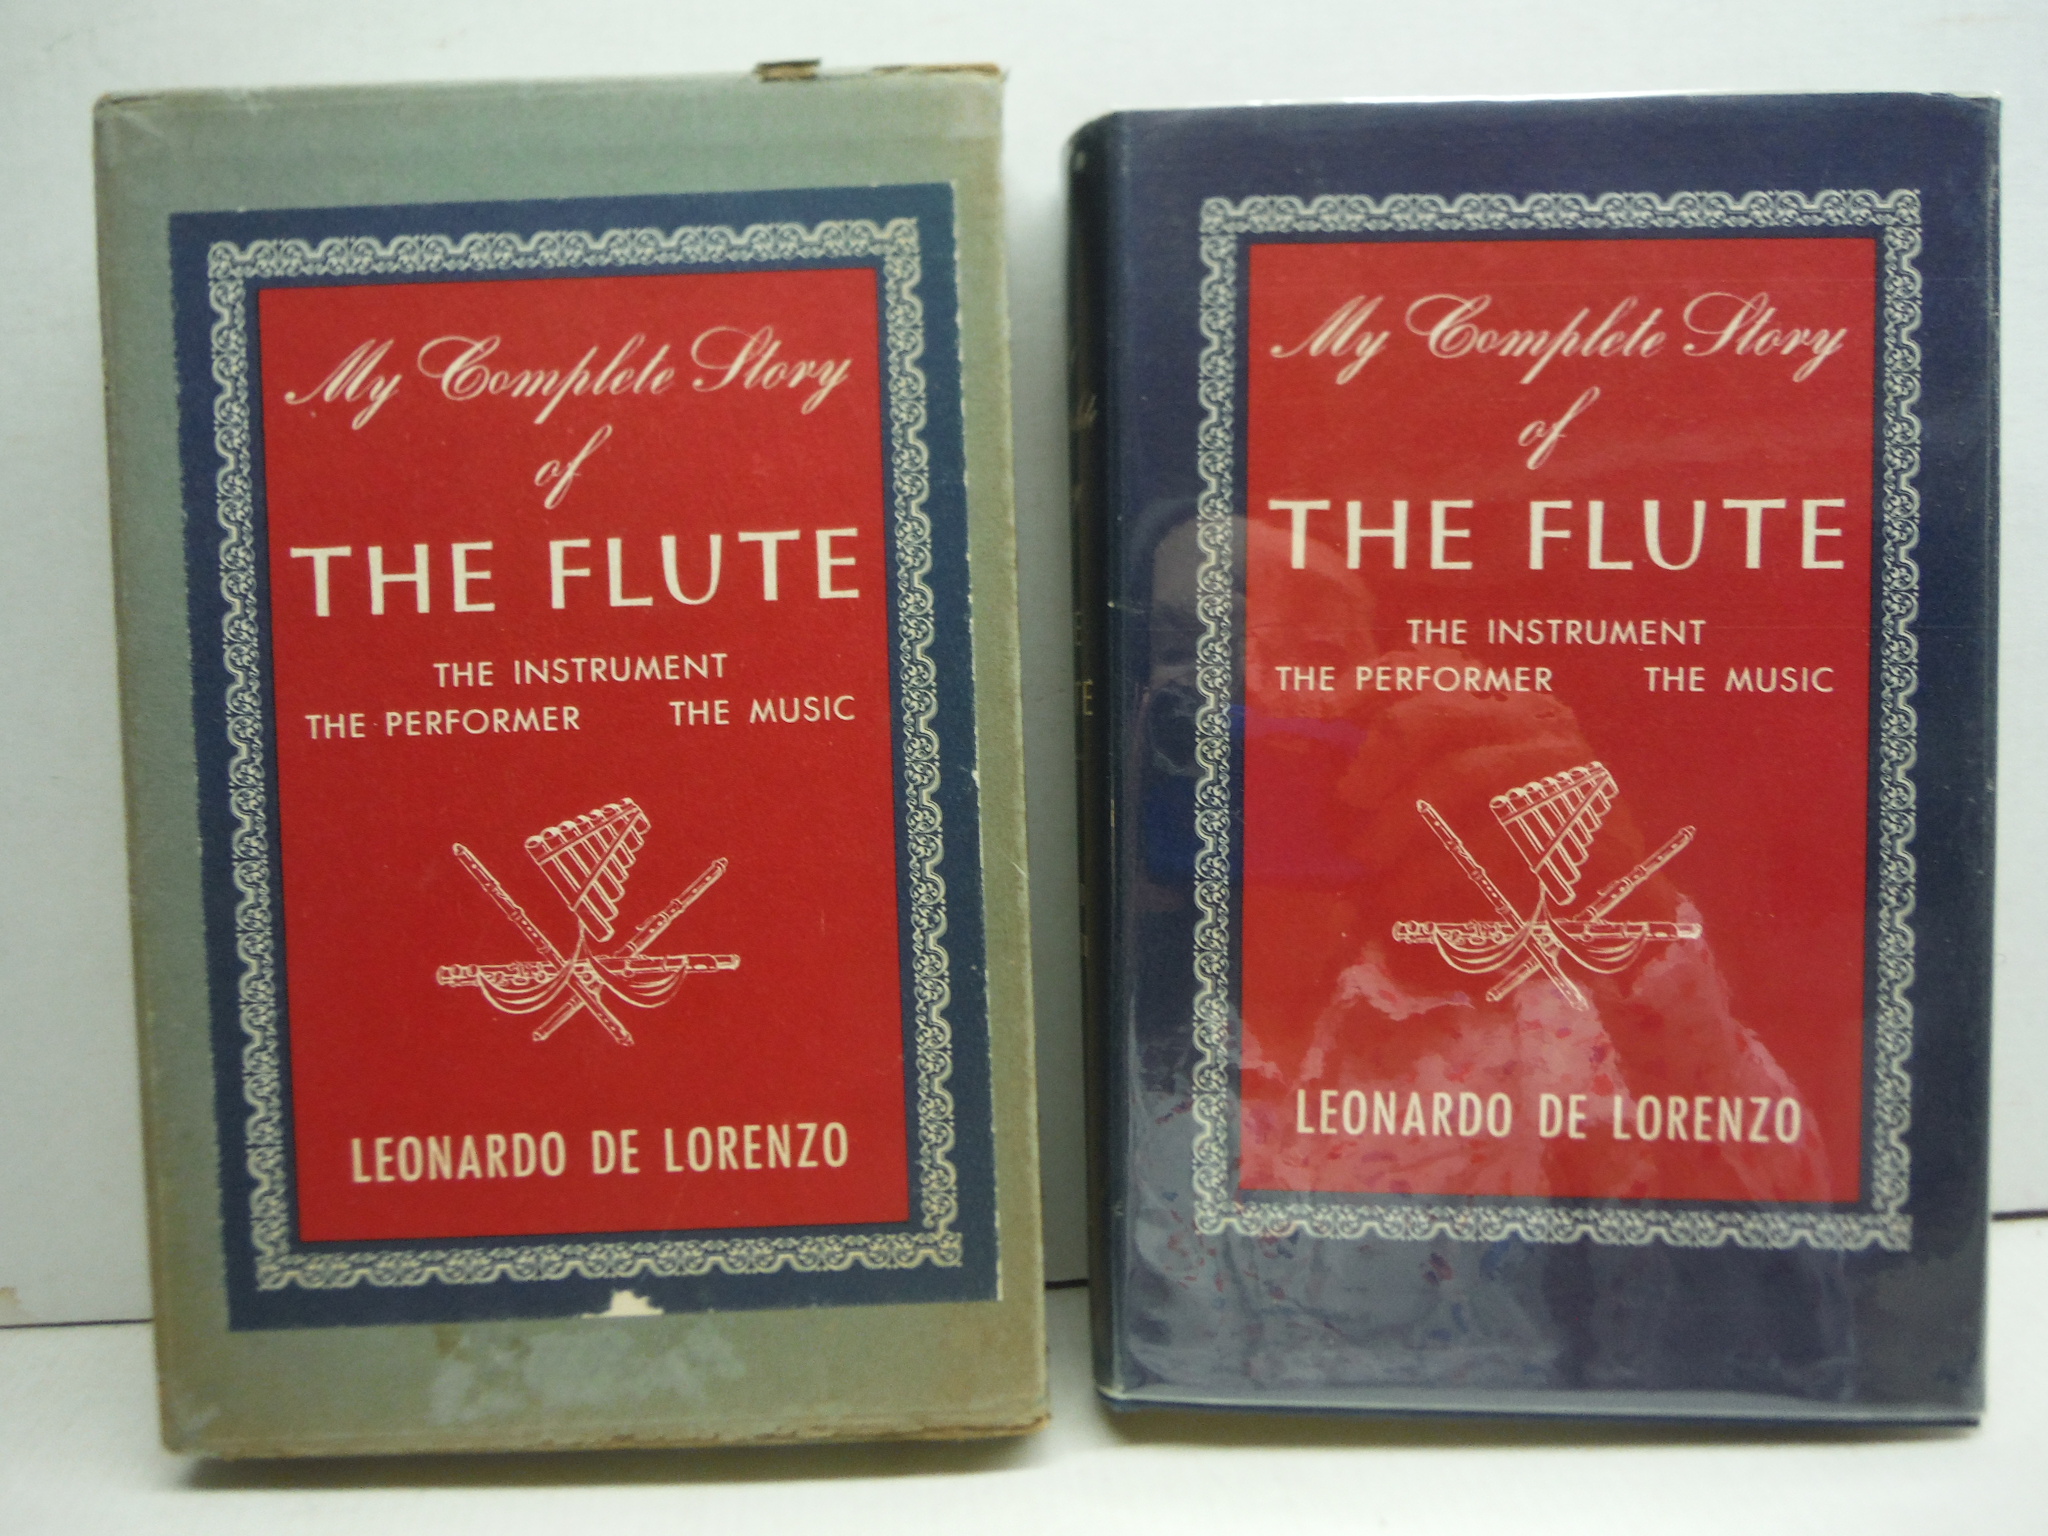 My complete story of the flute: The instrument, the performer, the music